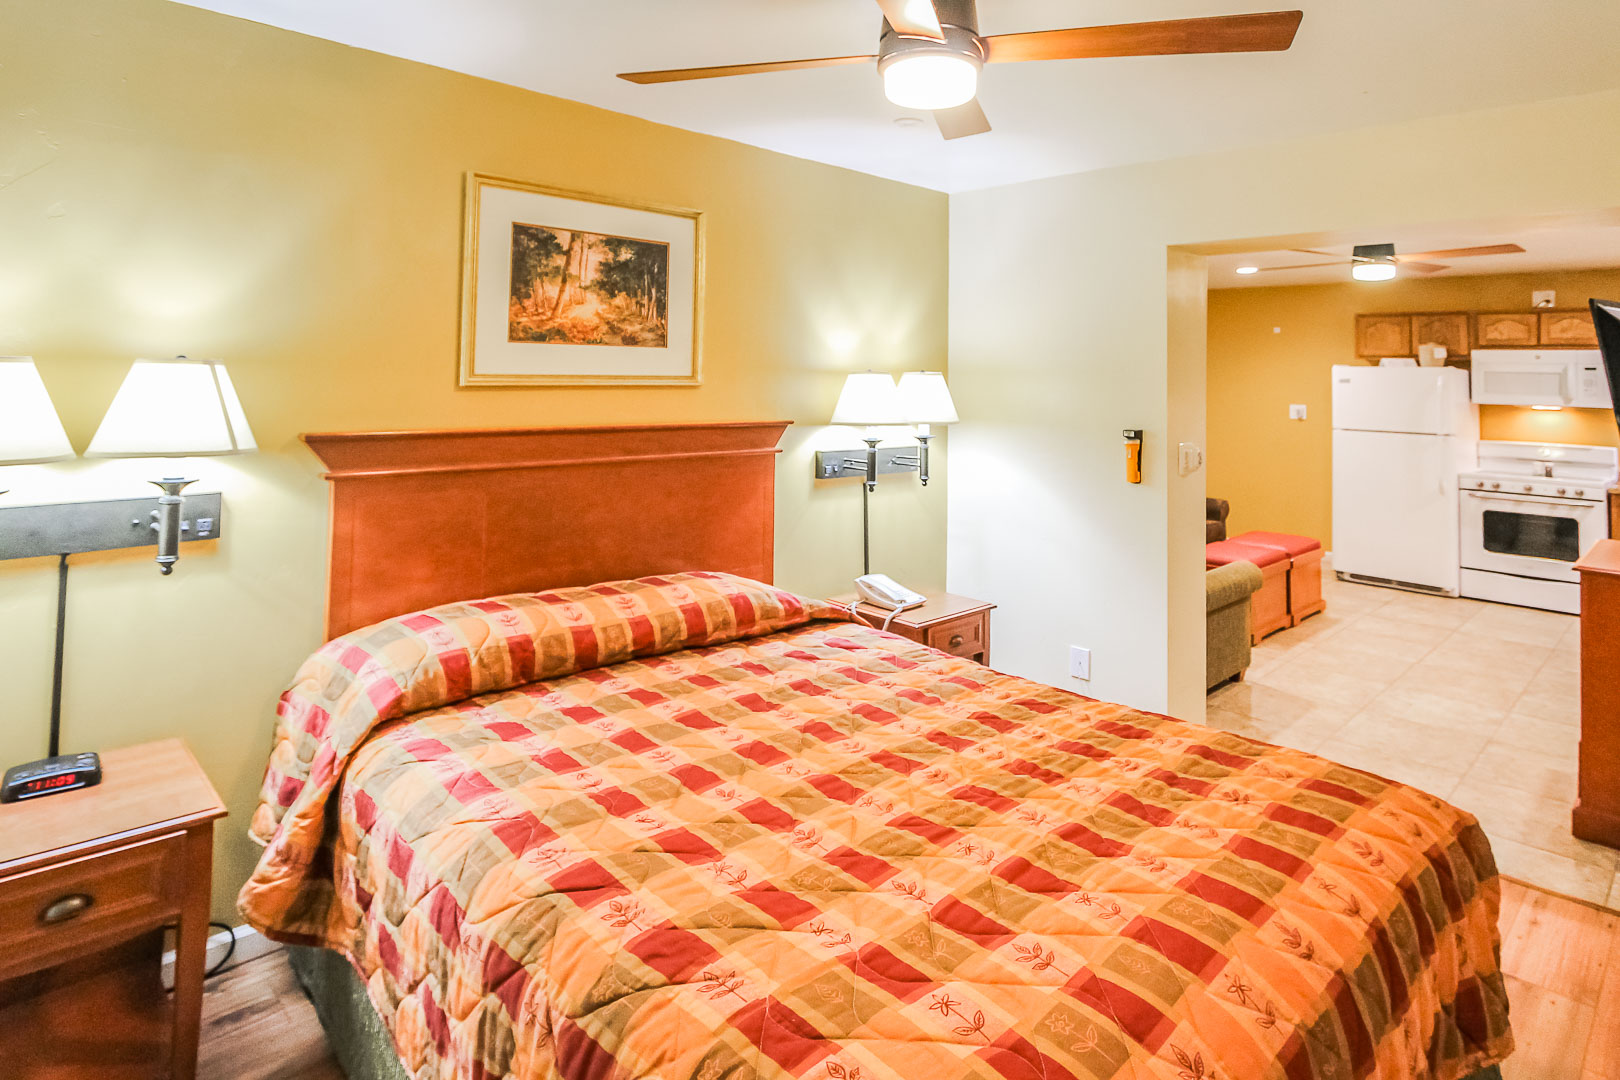 A spacious one bedroom at VRI's Roundhouse Resort in Pinetop, Arizona.